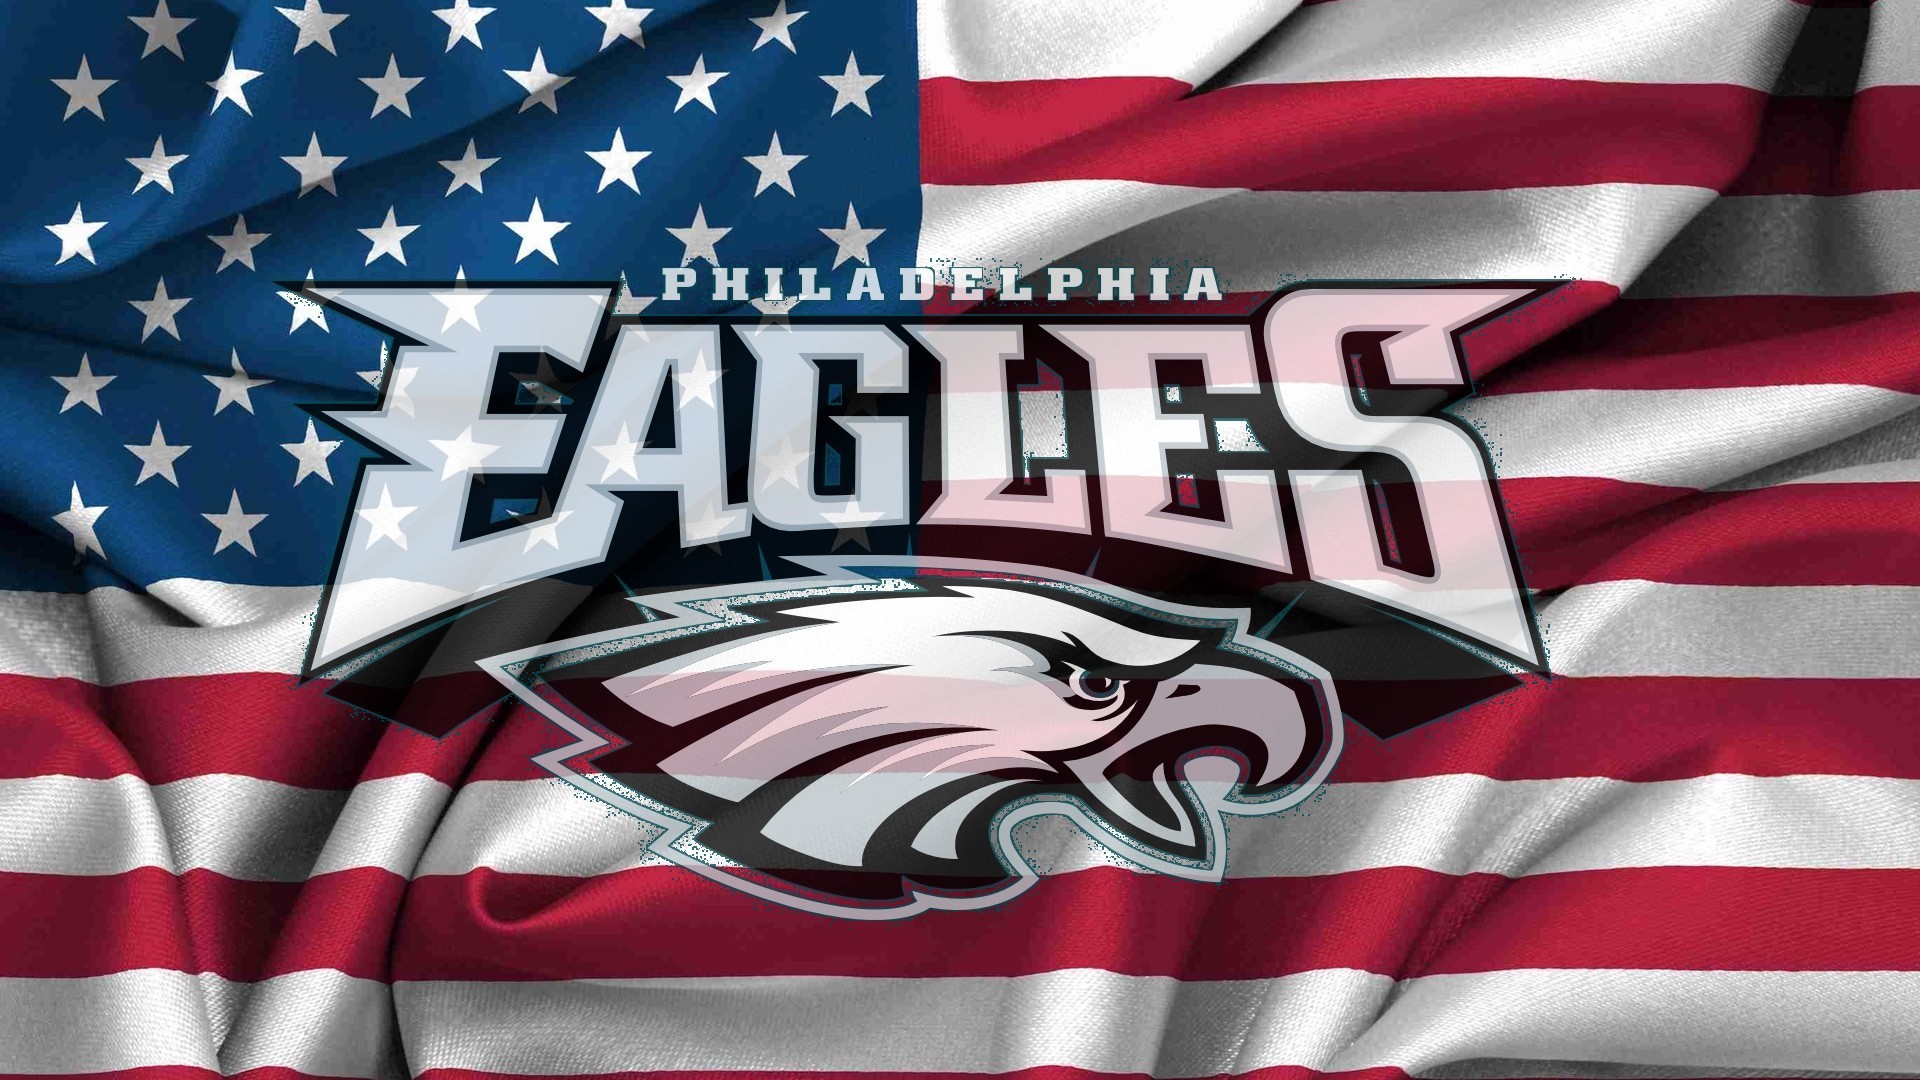 NFL Eagles HD Wallpapers With Resolution 1920X1080 pixel. You can make this wallpaper for your Mac or Windows Desktop Background, iPhone, Android or Tablet and another Smartphone device for free